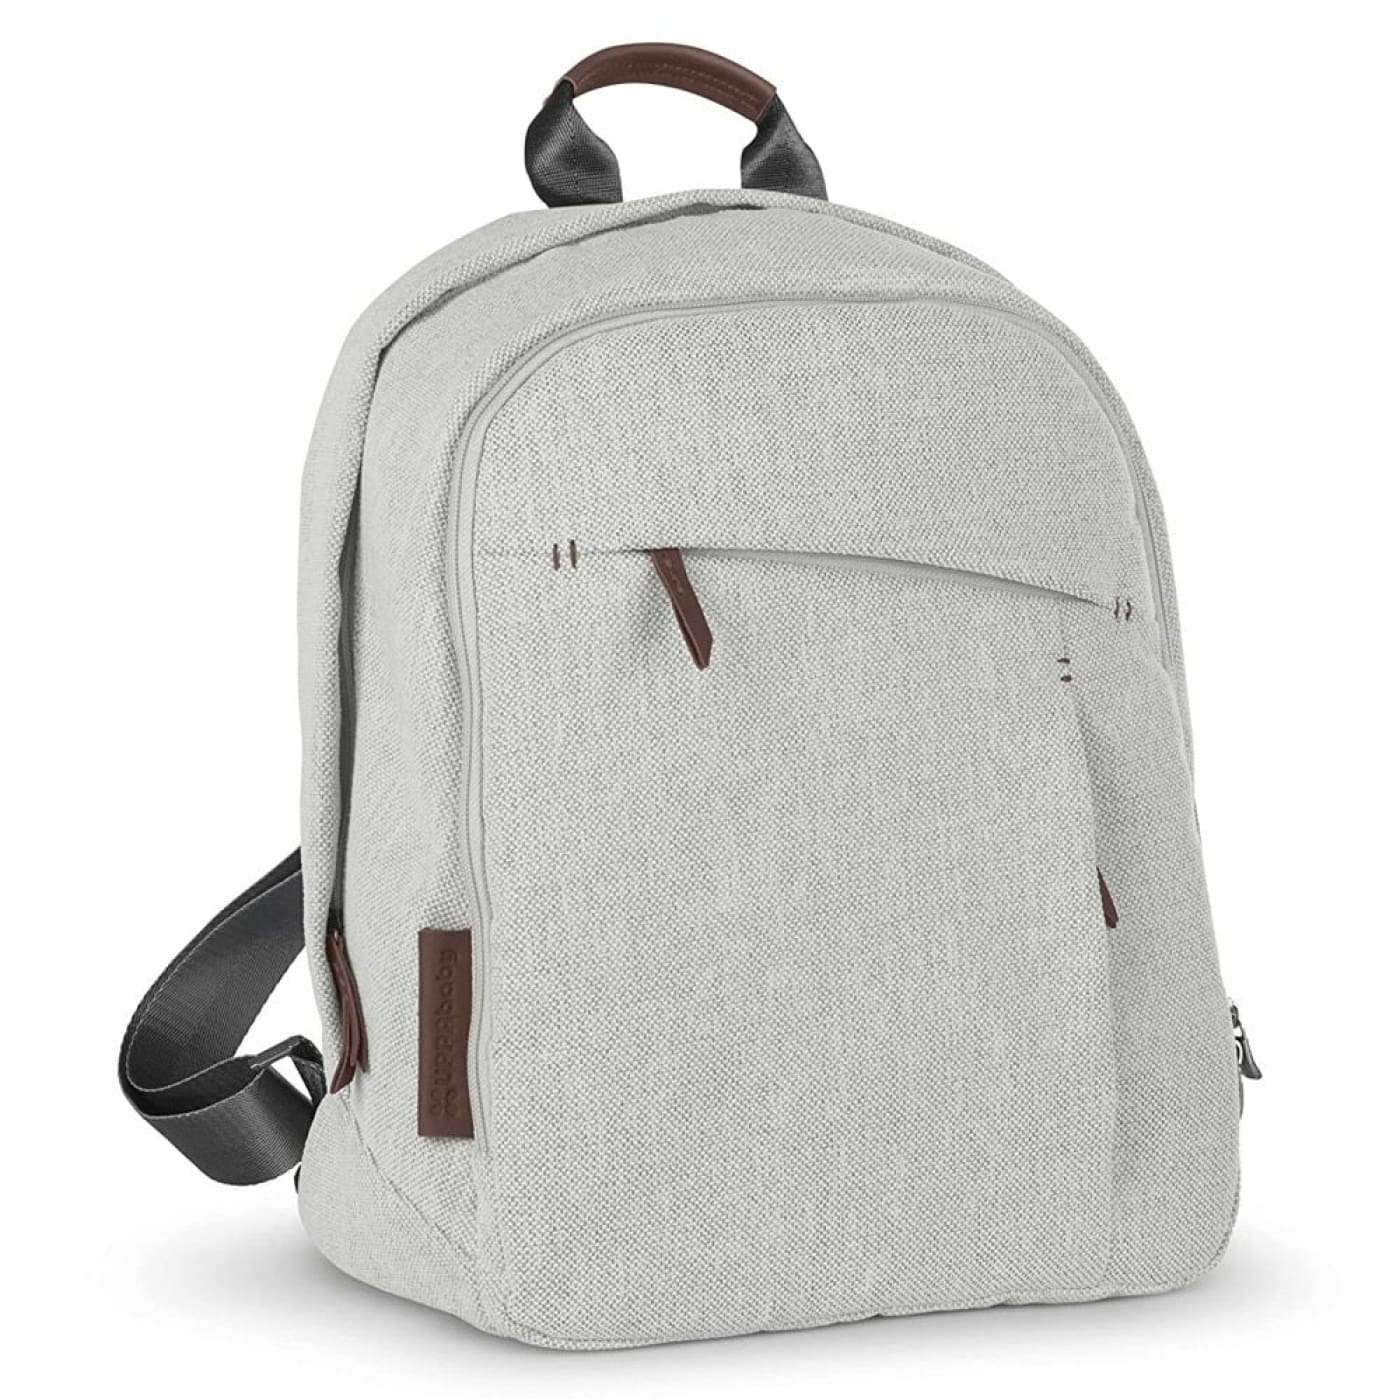 UPPAbaby Changing Backpack - Anthony (White & Grey Chenille/Chestnut Leather) - Anthony - ON THE GO - NAPPY BAGS/LUGGAGE